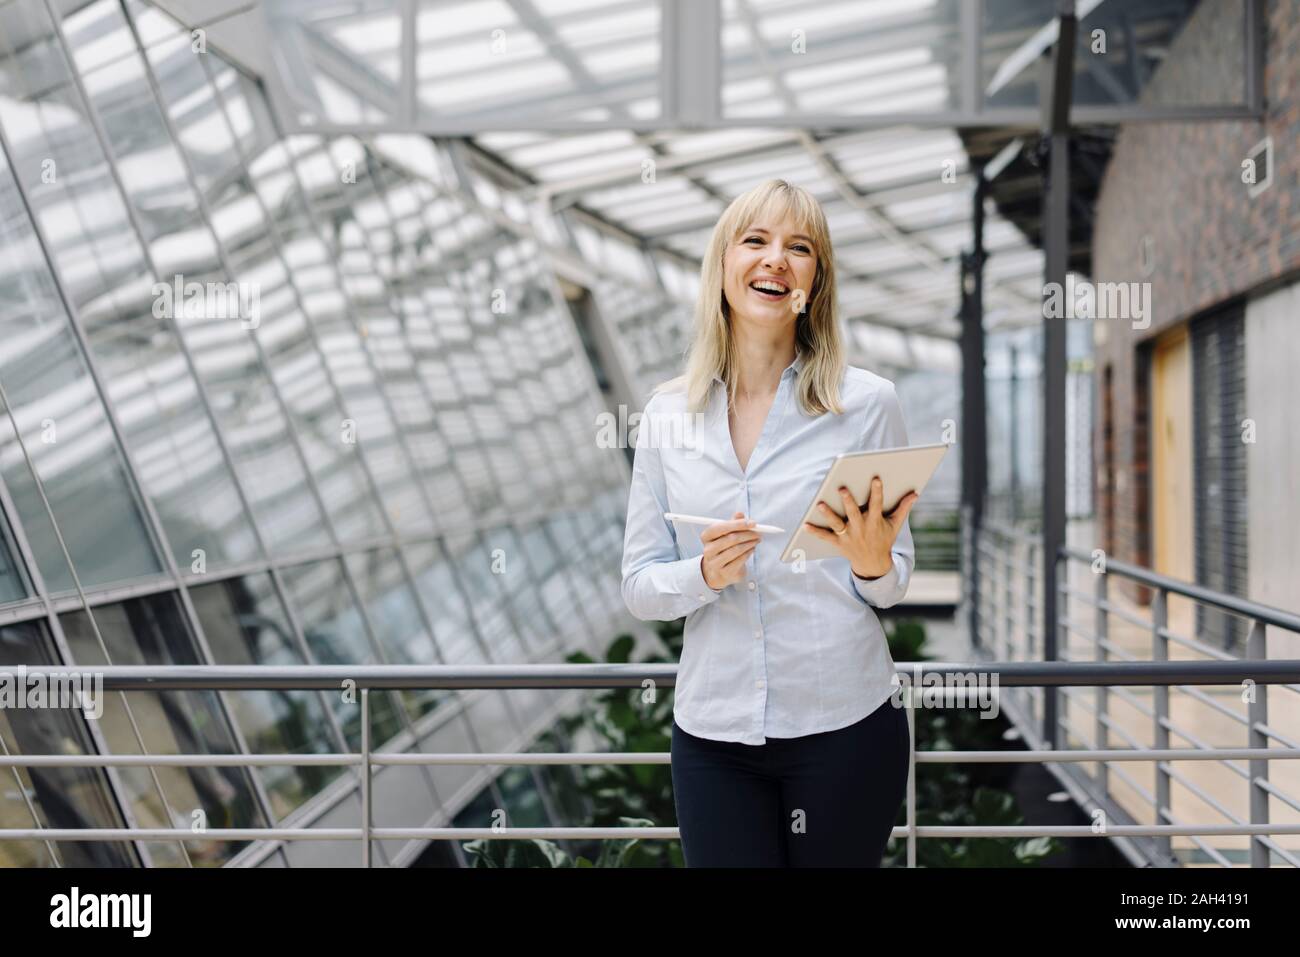 Laughing young businesswoman in a modern office building using tablet Banque D'Images